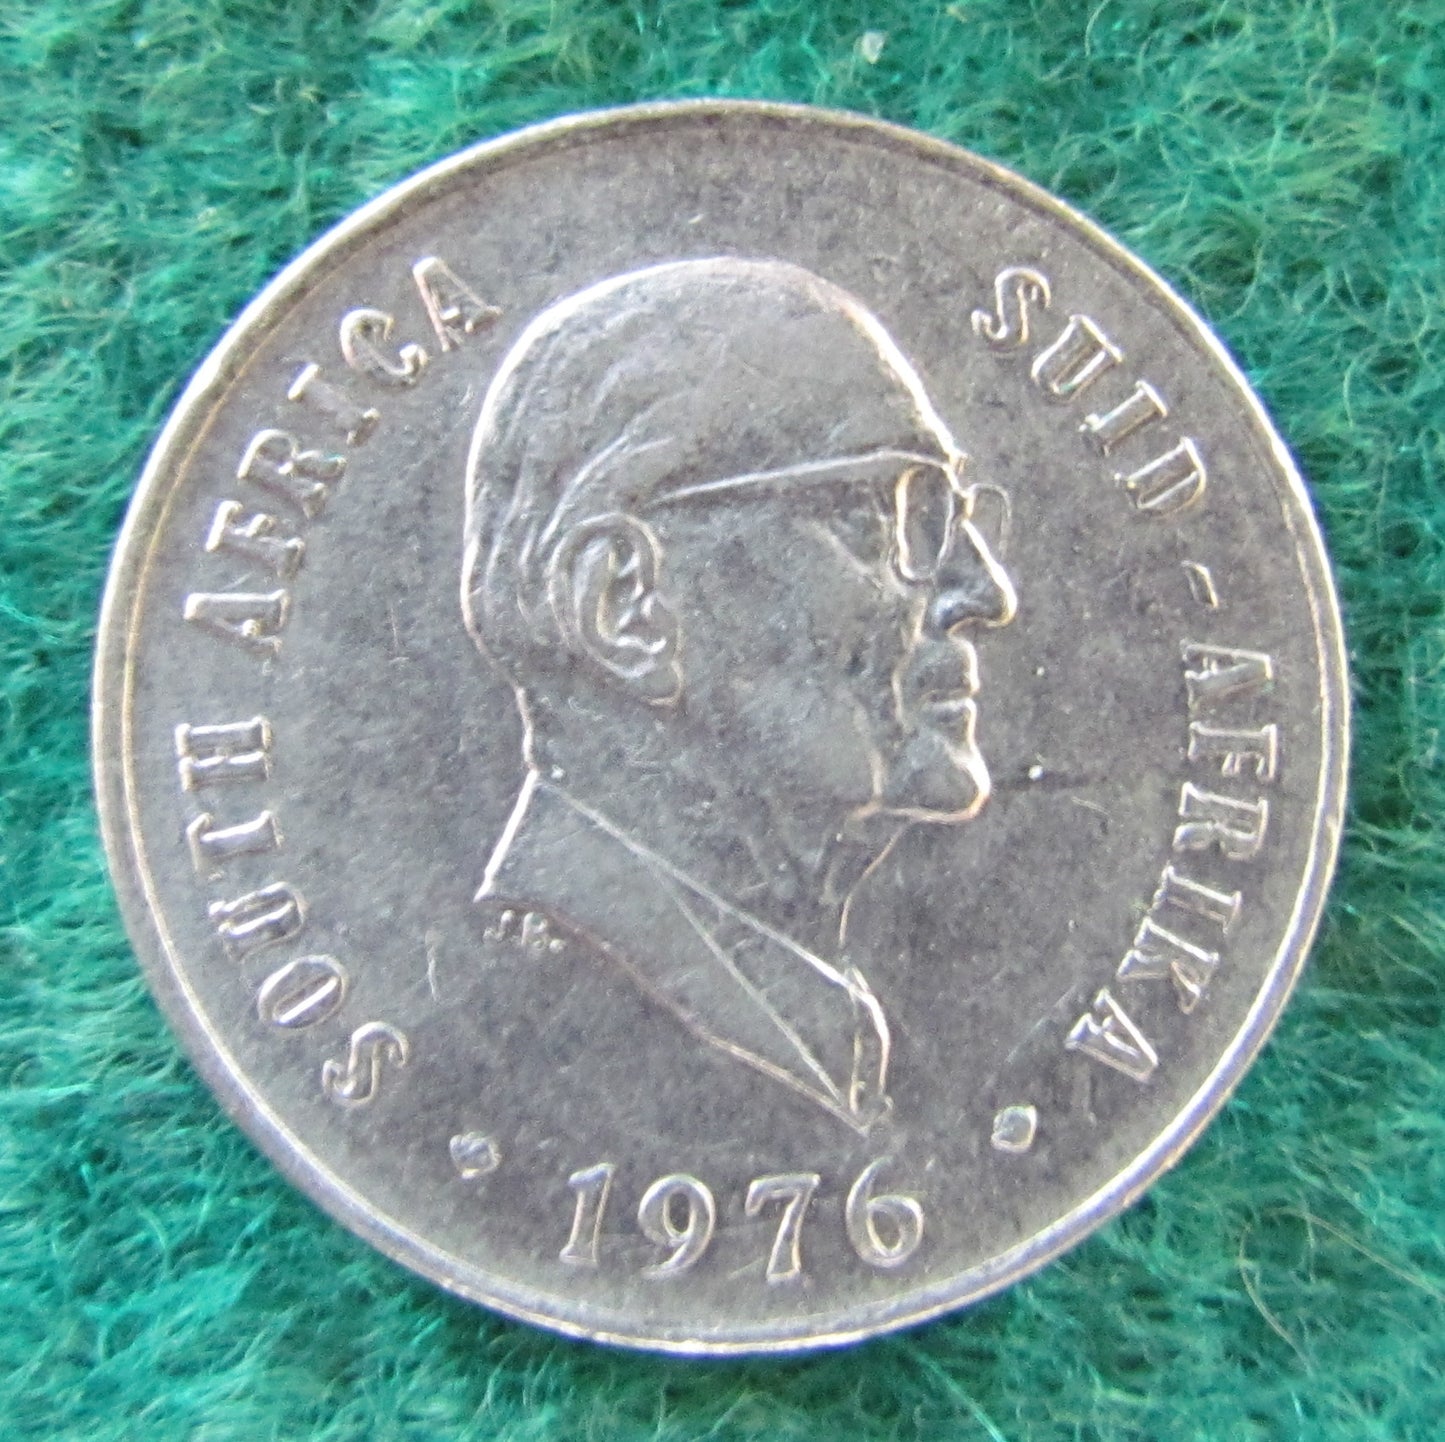 South Africa 1976 10 Cent Coin - Circulated